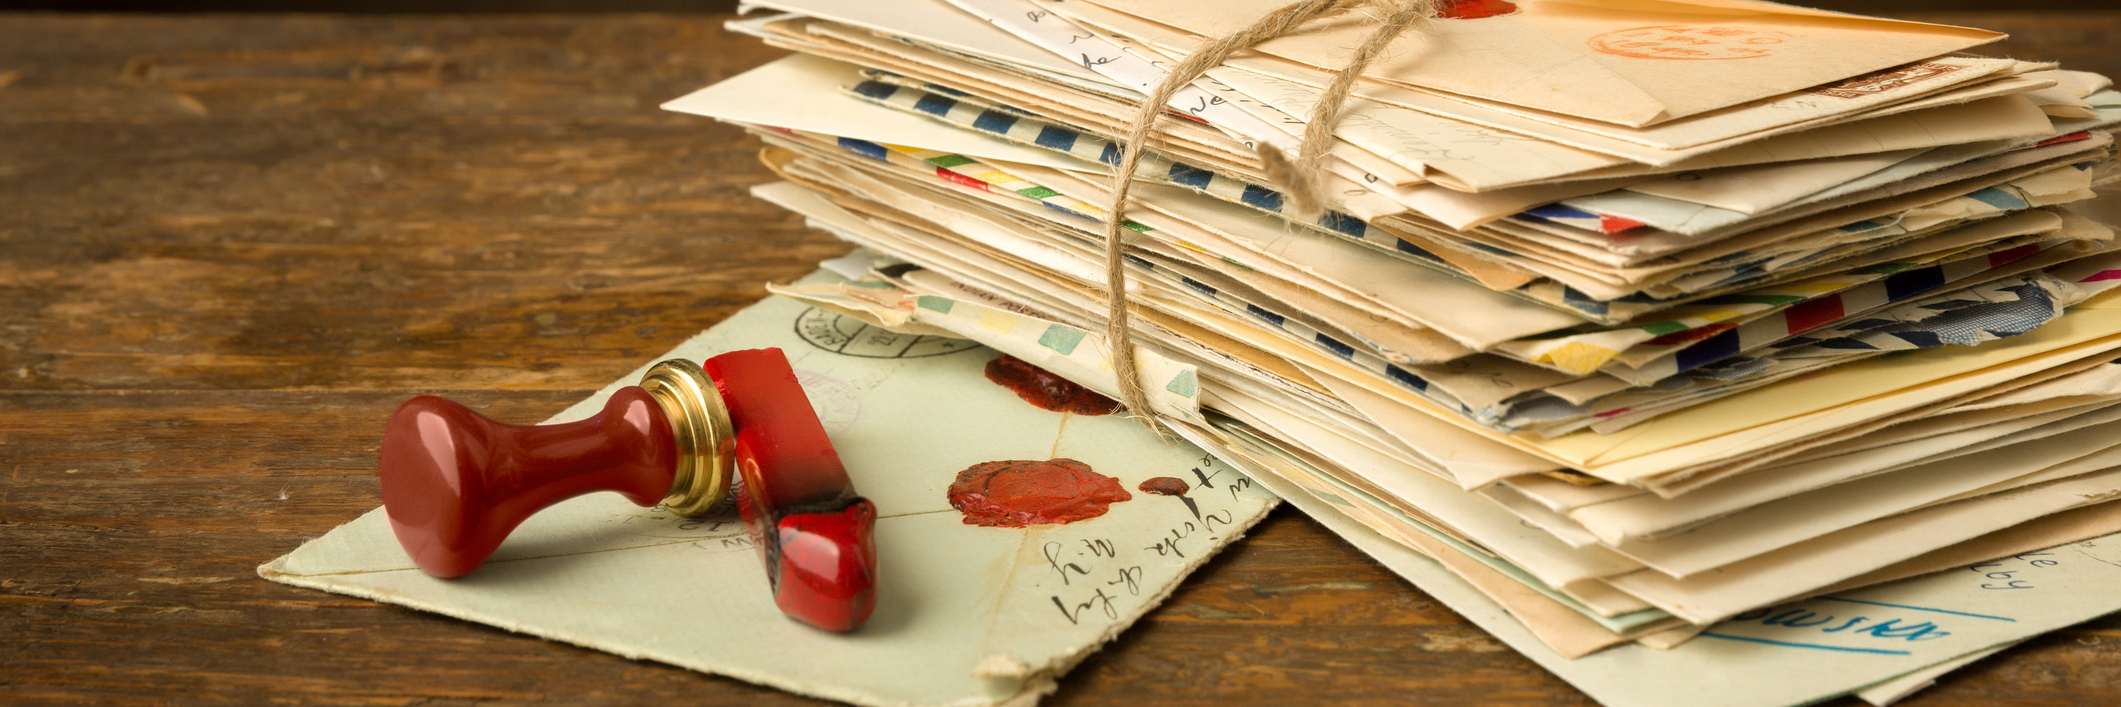 Stack of letters and a wax seal on a wooden surface.